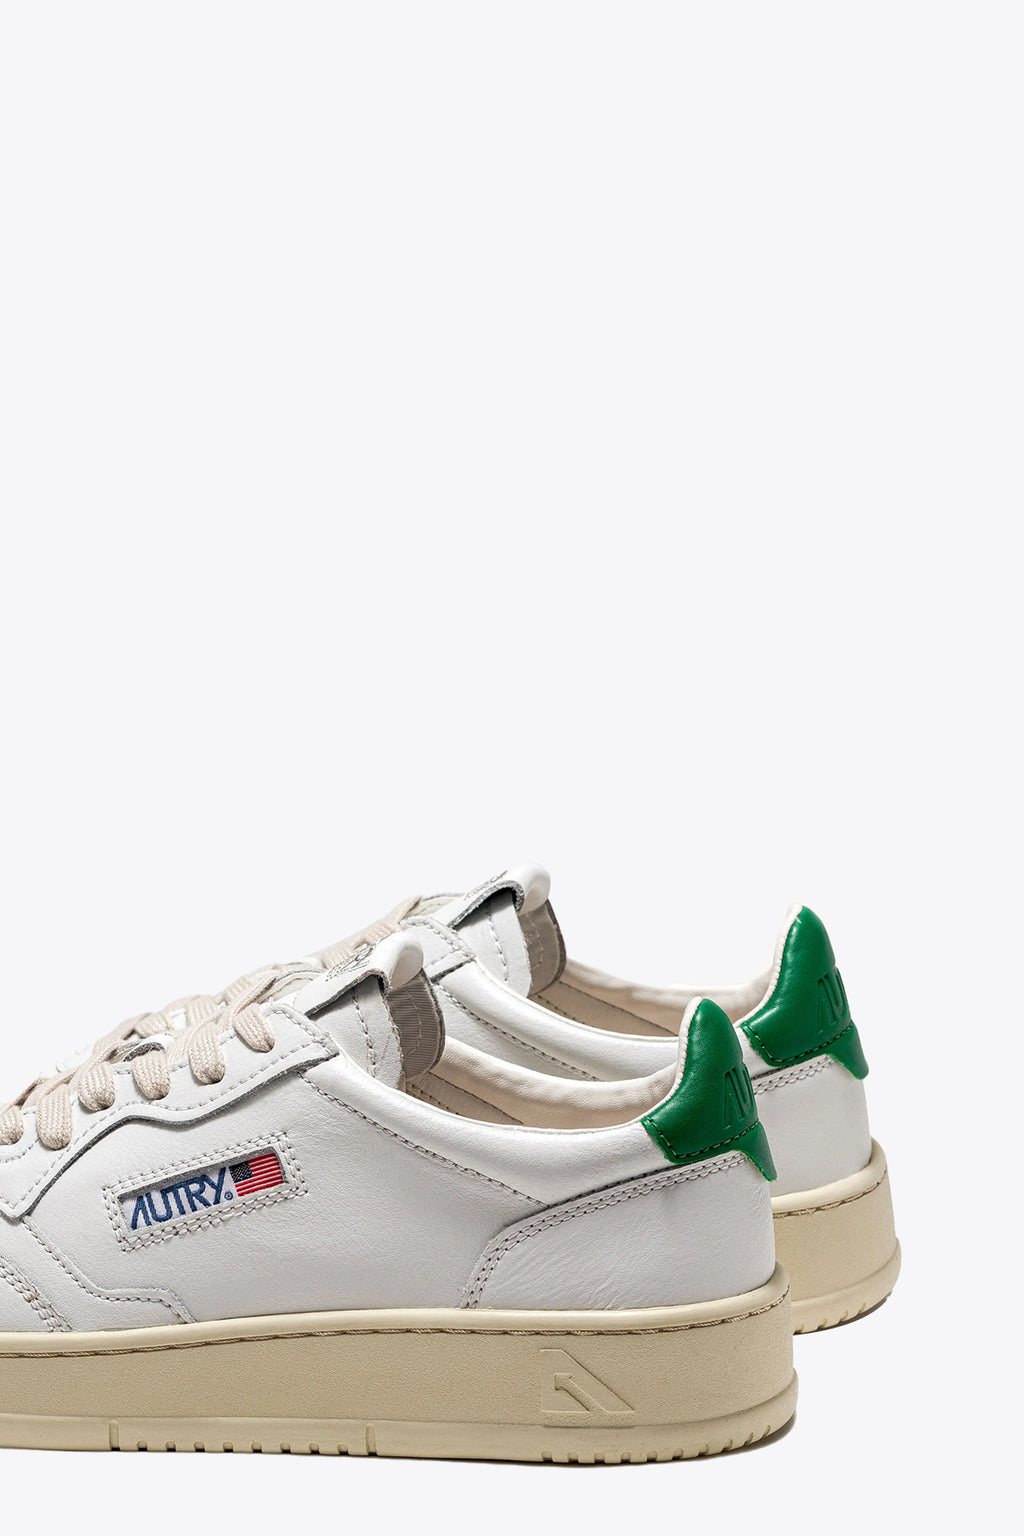 alt-image__White-leather-low-sneaker-with-green-tab---Medalist